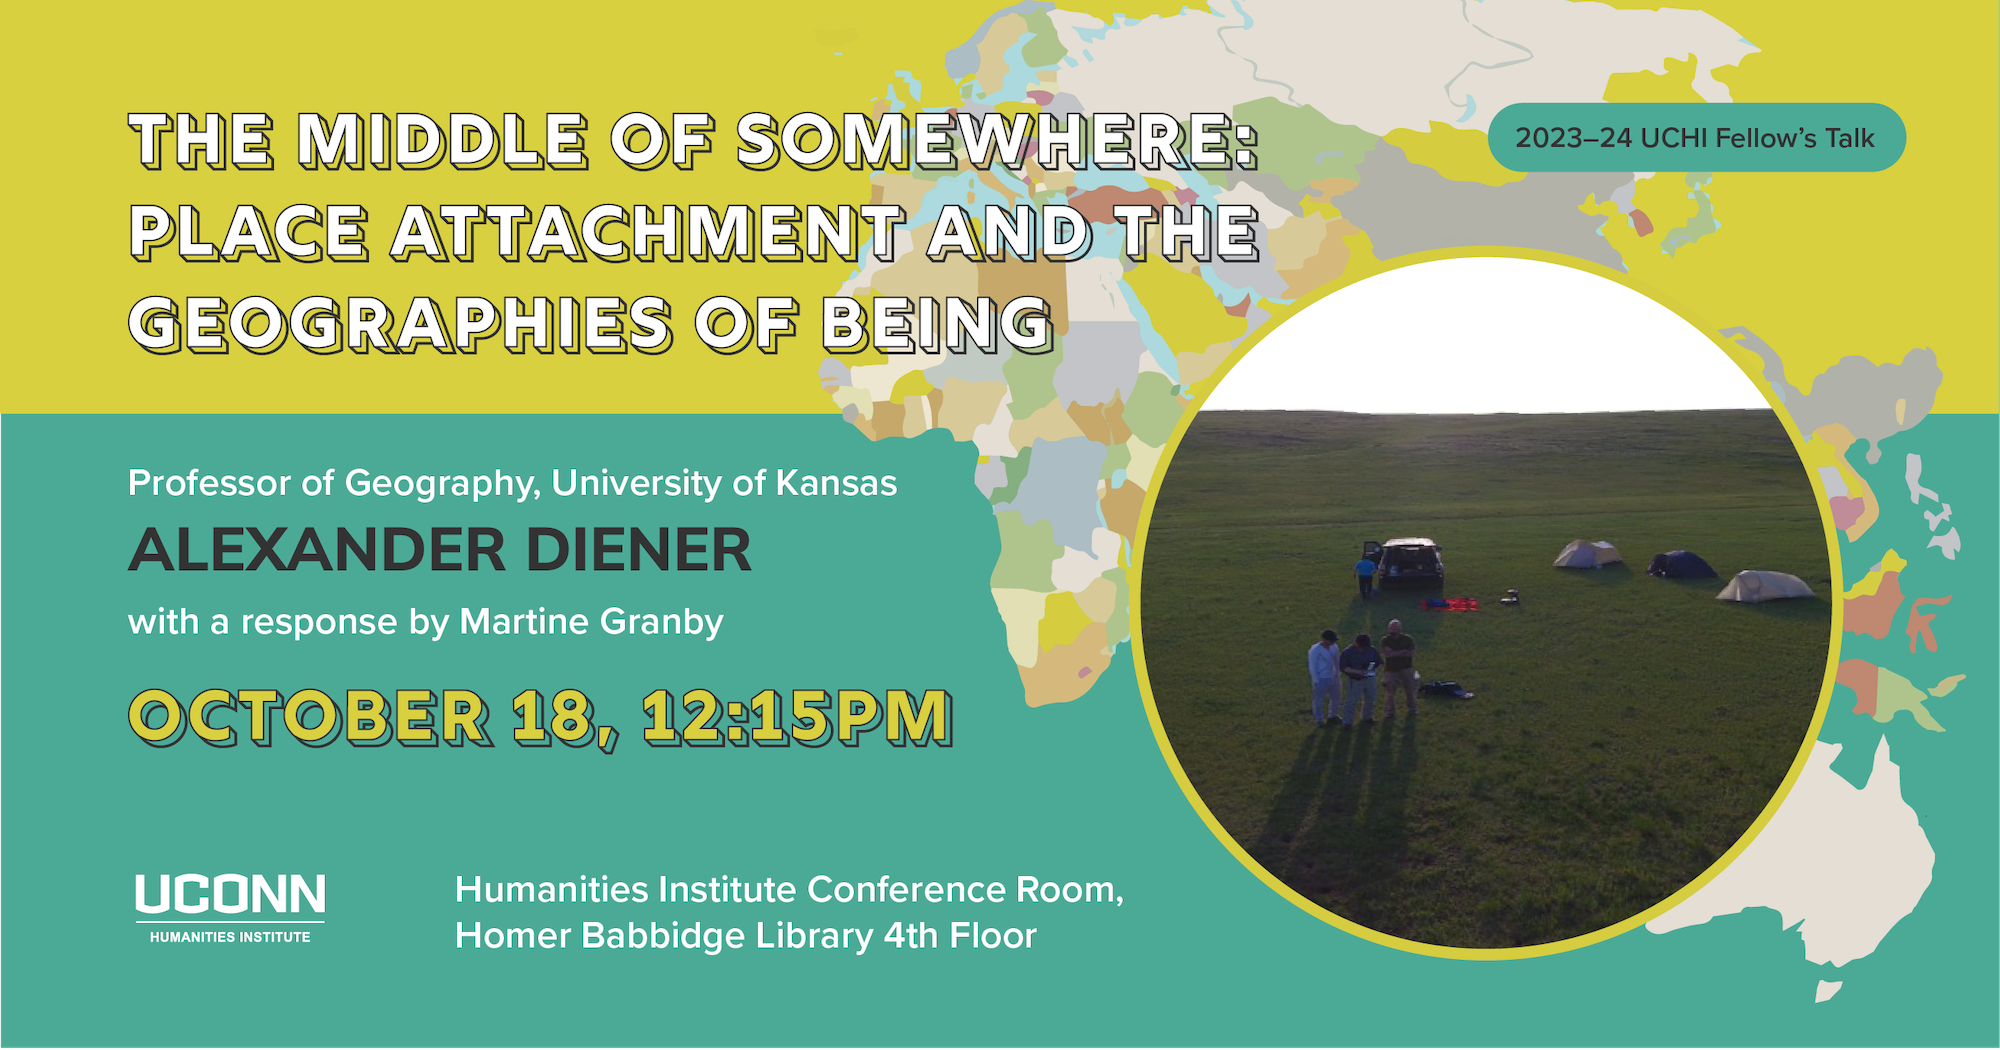 2023–23 UCHI Fellow's Talk: "The Middle of Somewhere: Place Attachment and the Geographies of Being" Professor of Geography, University of Kansas Alexander Diener. With a response by Martine Granby. October 18, 12:15 pm. UCHI conference room, Homer Babbidge Library, Fourth Floor.